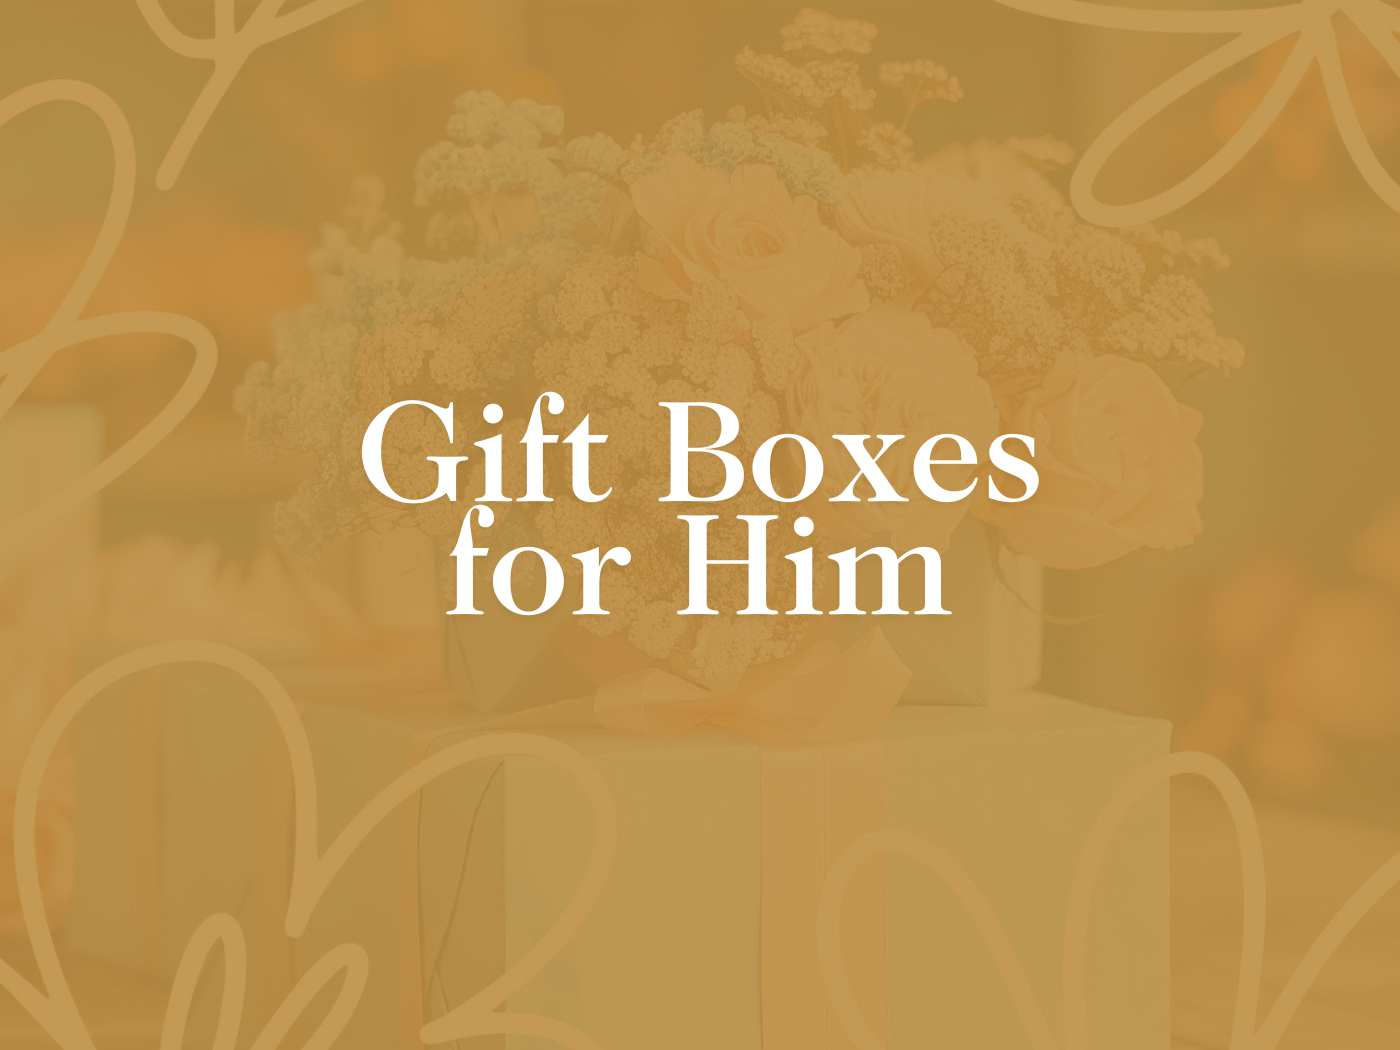 A decorative display of gift boxes with flowers, representing the Gift Boxes for Him Collection - Gift hampers from local artisans make a good gift - Fabulous Flowers and Gifts